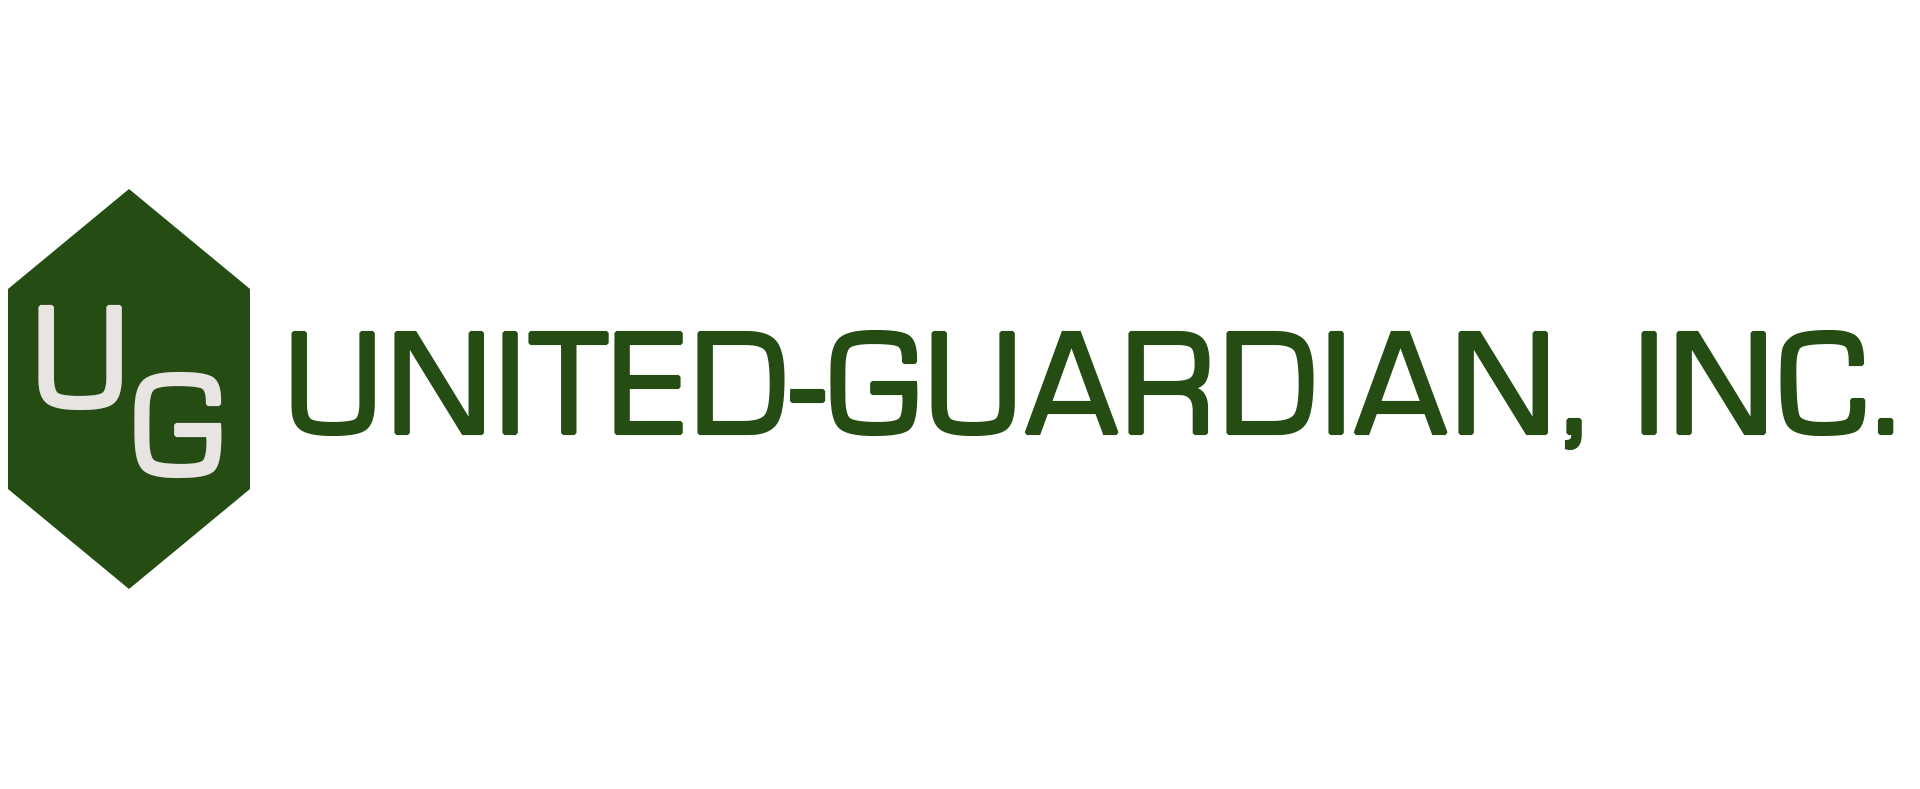 high-res=logo-green (1).png